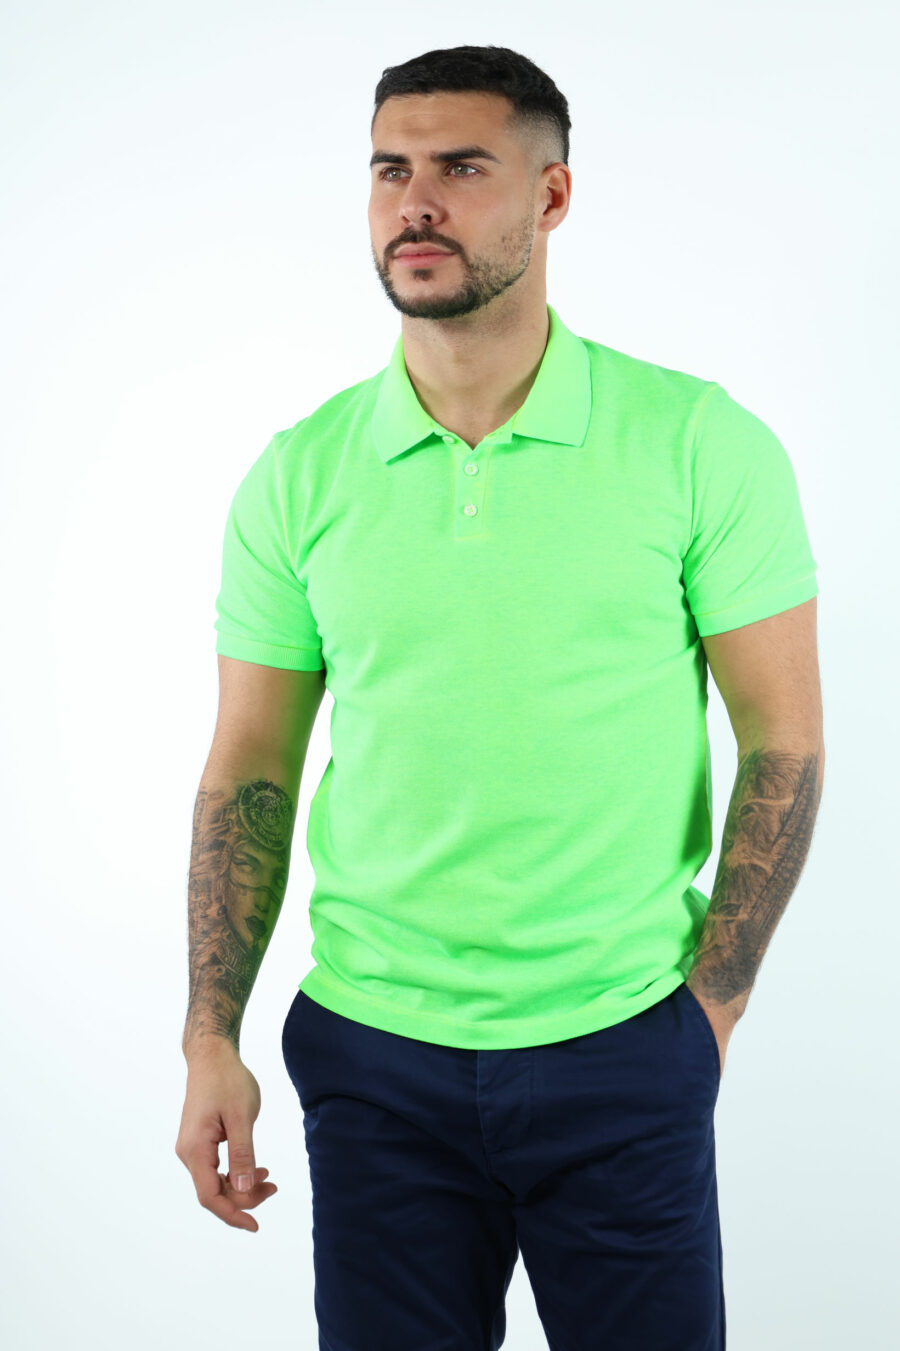 Neon green "tennis fit" polo shirt with "icon" logo on the back - 106697